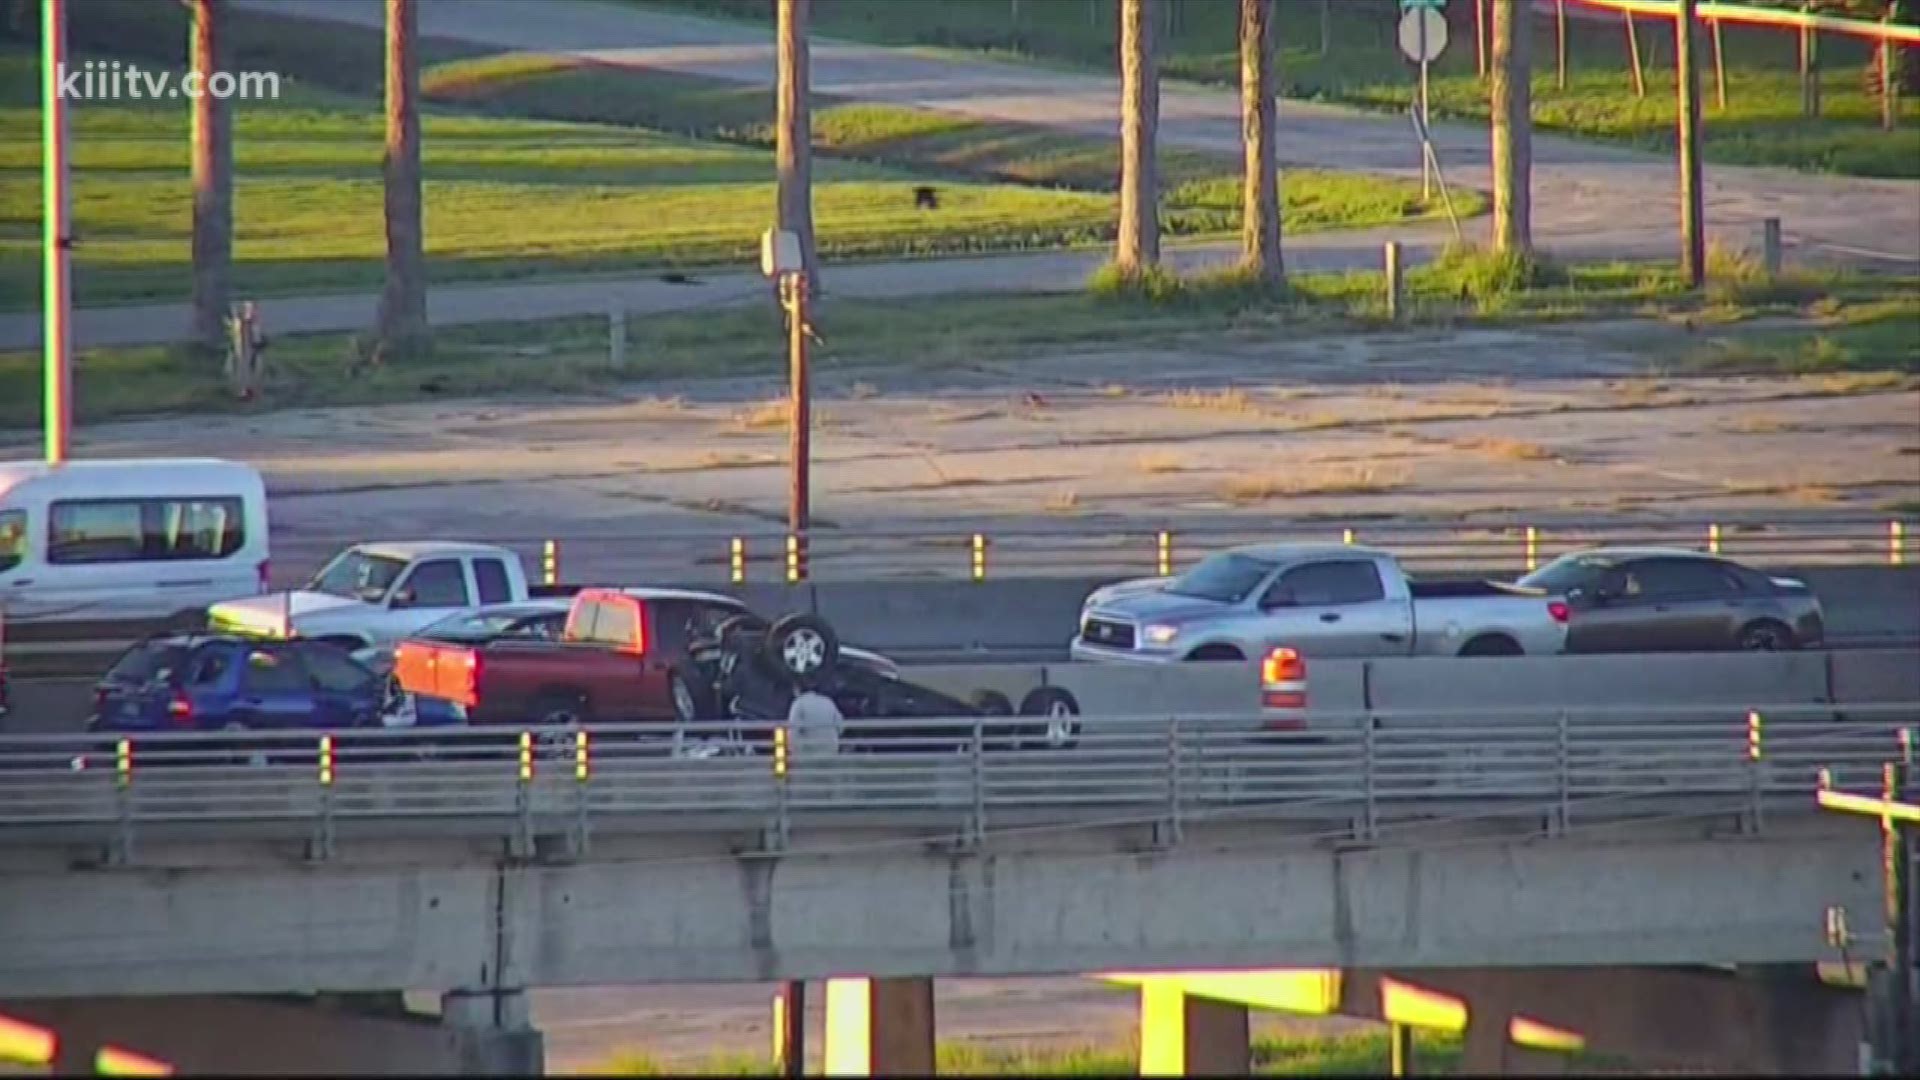 Corpus Christi police were called to the scene of a major accident Monday evening on the northbound side of the Harbor Bridge heading toward Portland.